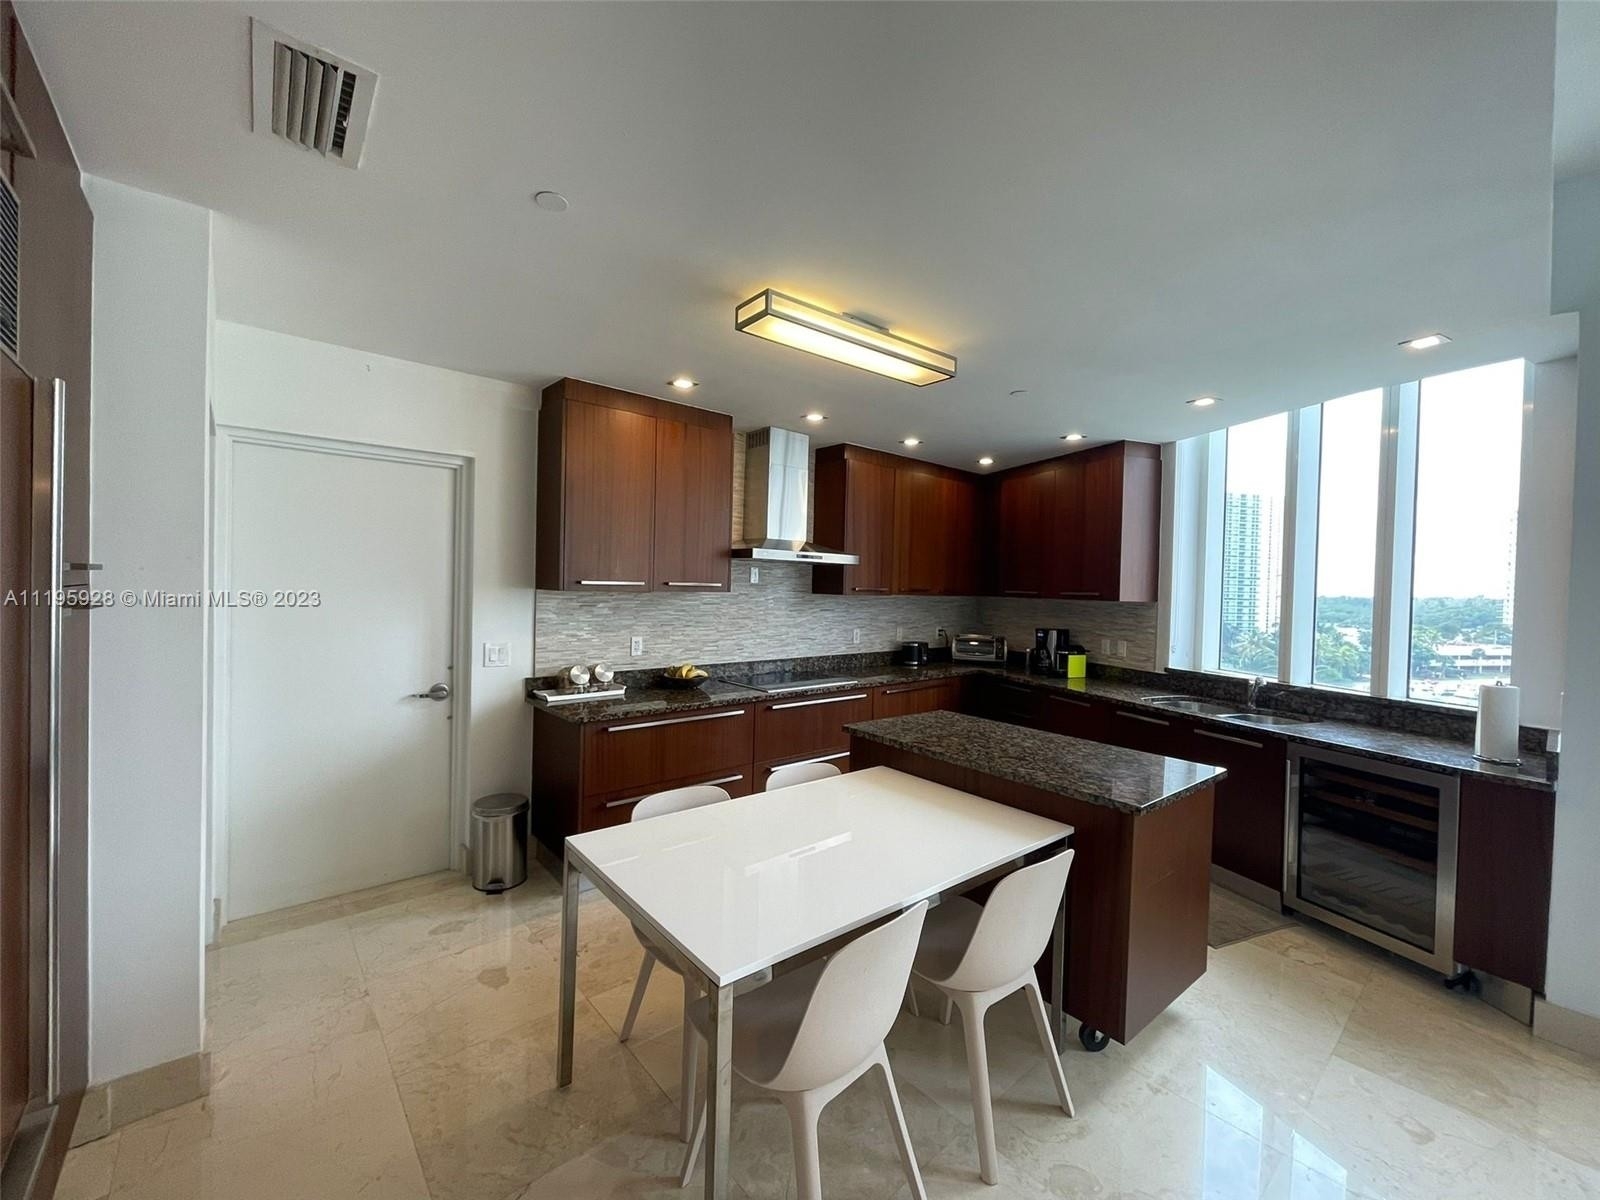 8. Condominiums for Sale at 15901 Collins Ave, 504 Sunny Isles Beach, FL 33160